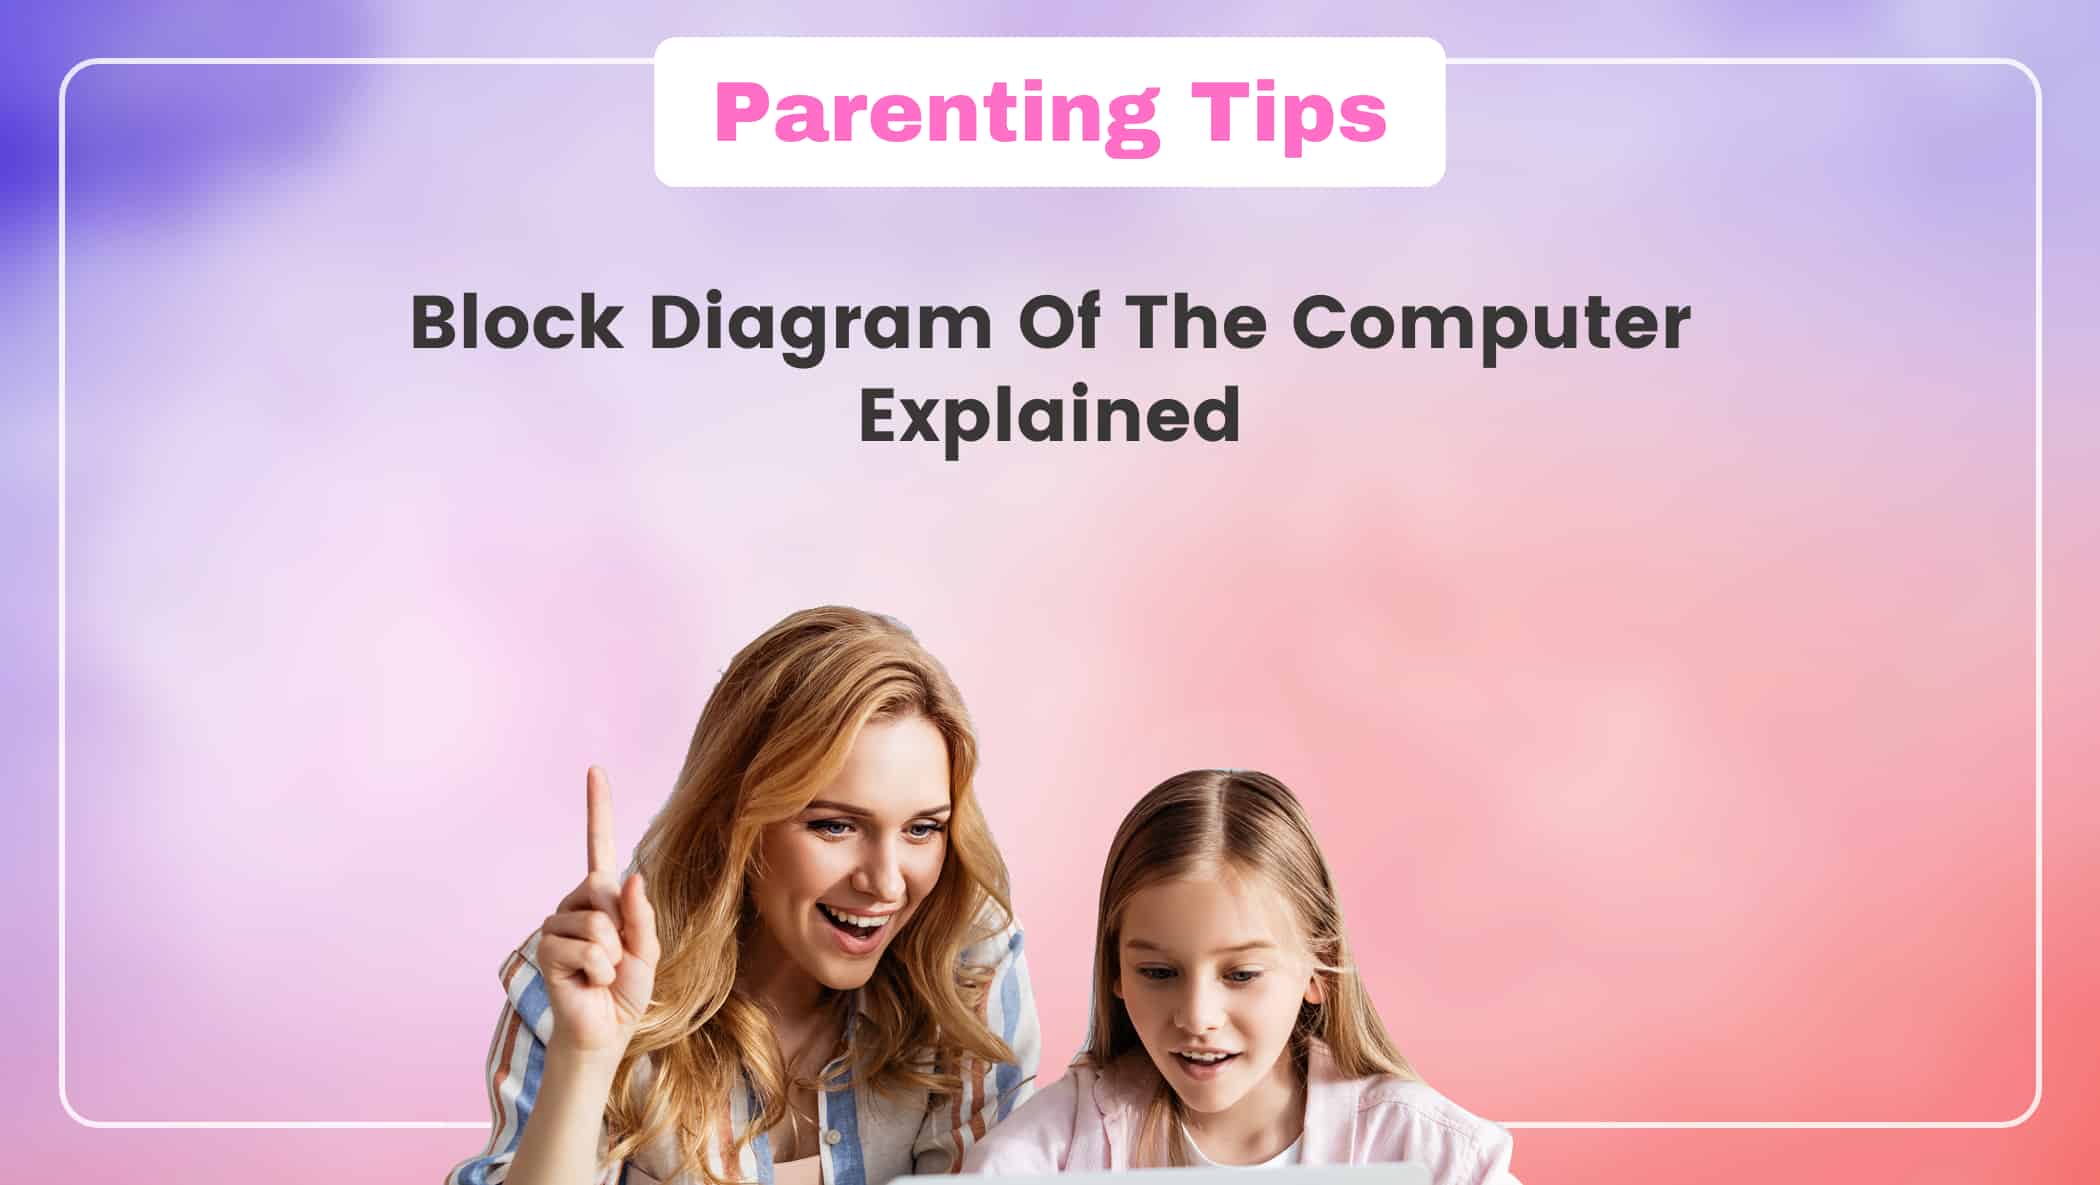 Block Diagram Of The Computer Explained Image